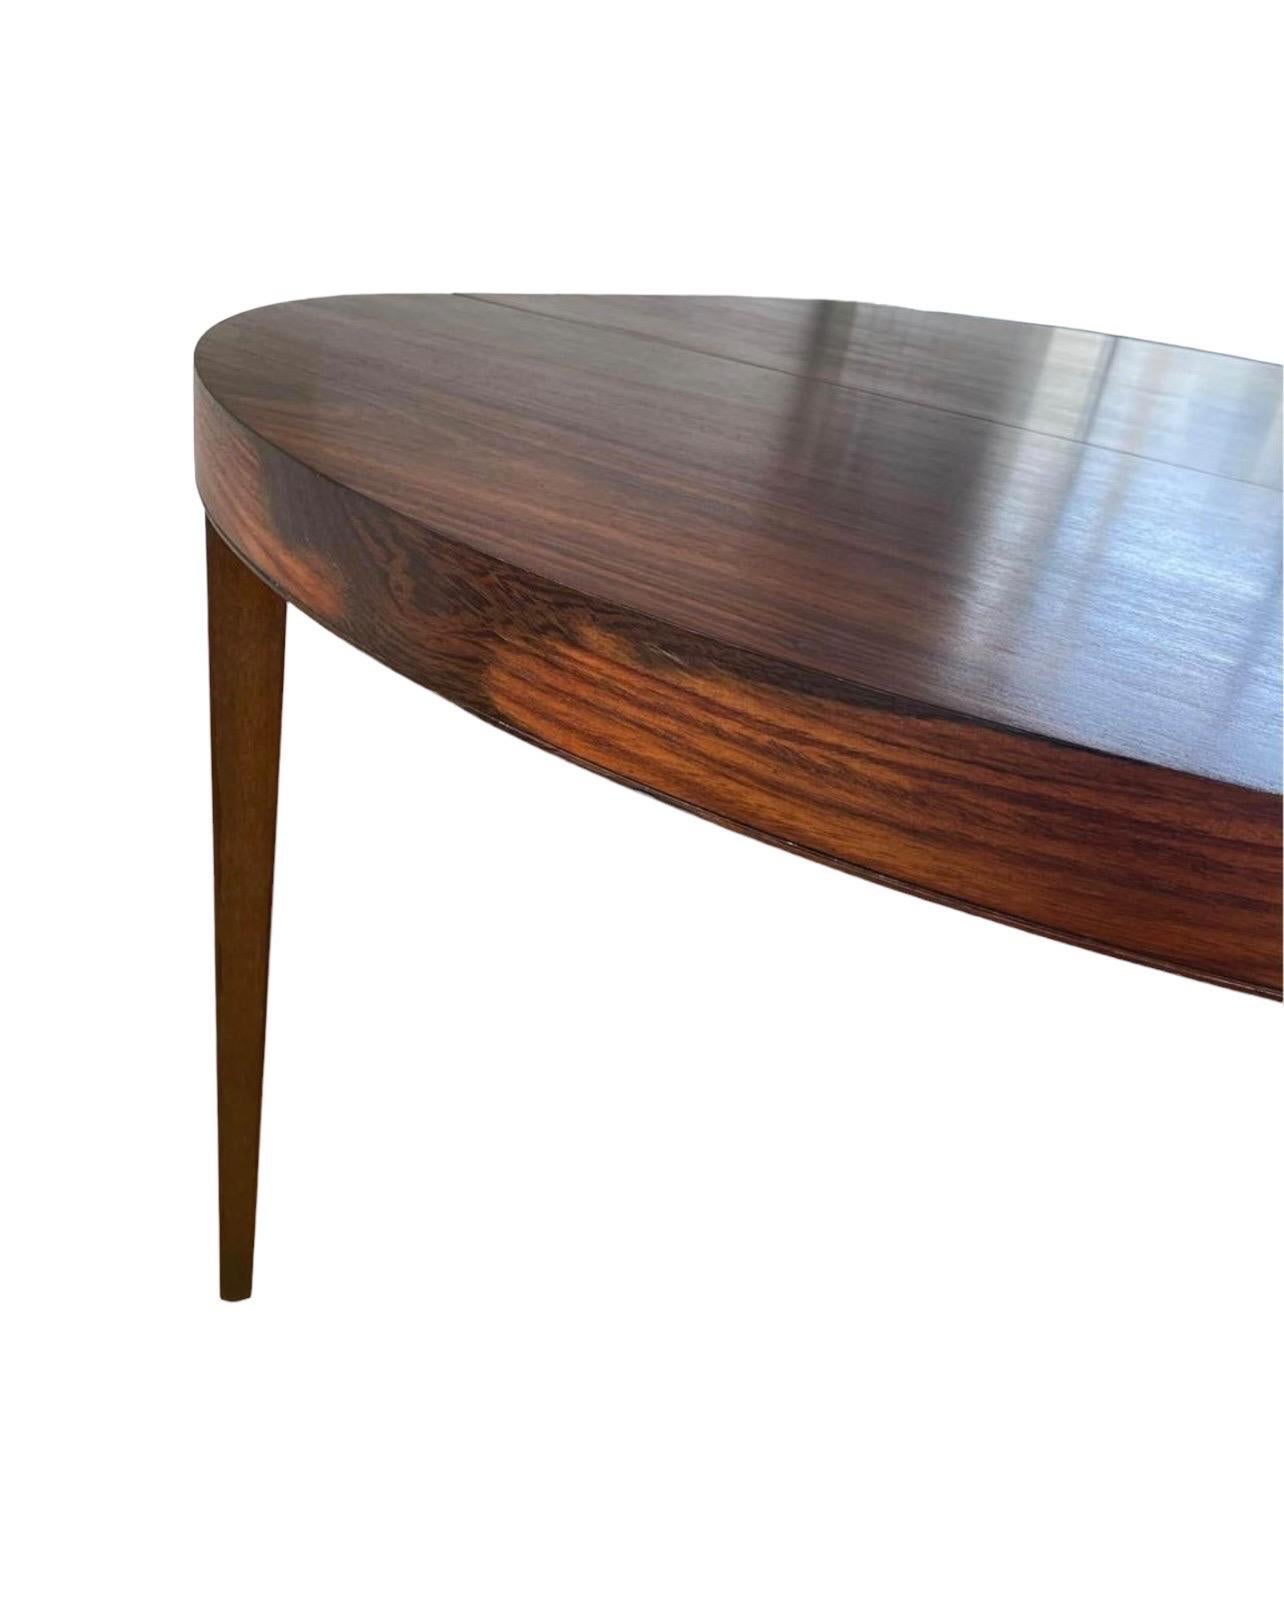 Late 20th Century Vintage Danish Mid Century Modern Rosewood Dining Table Extendable with one leaf For Sale